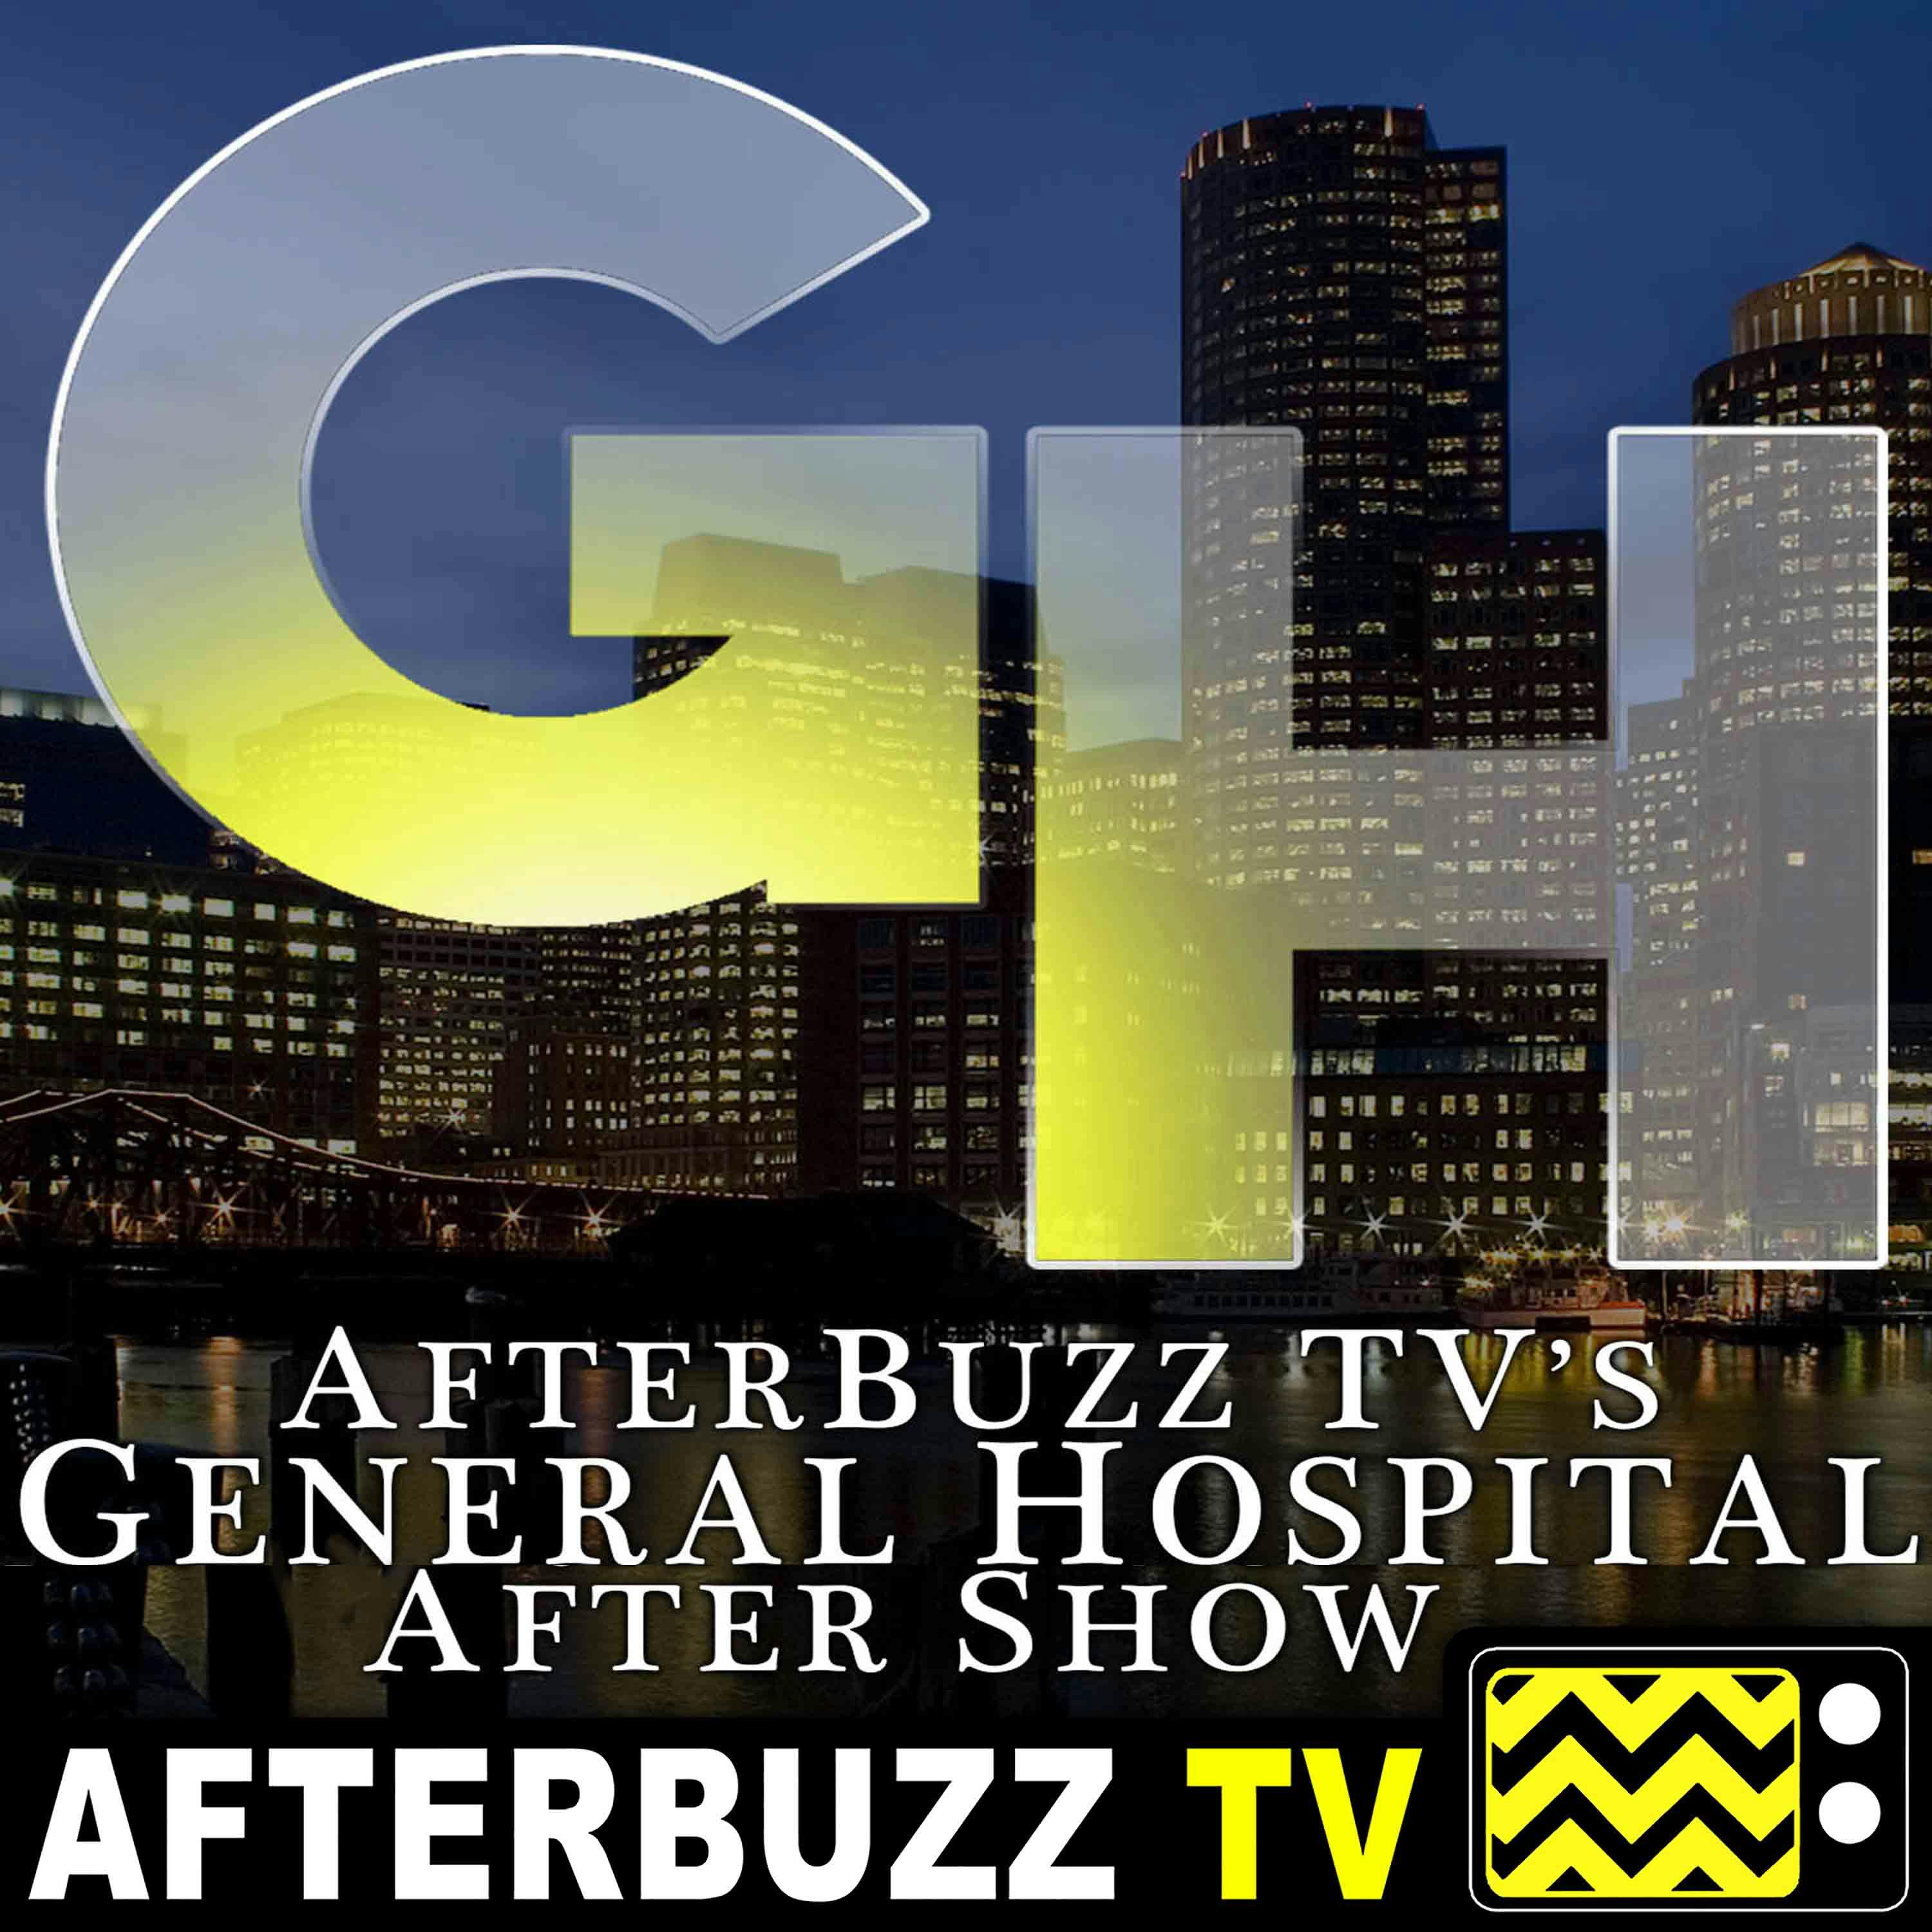 Review Of General Hospital for February 11th - February 15th, 2019